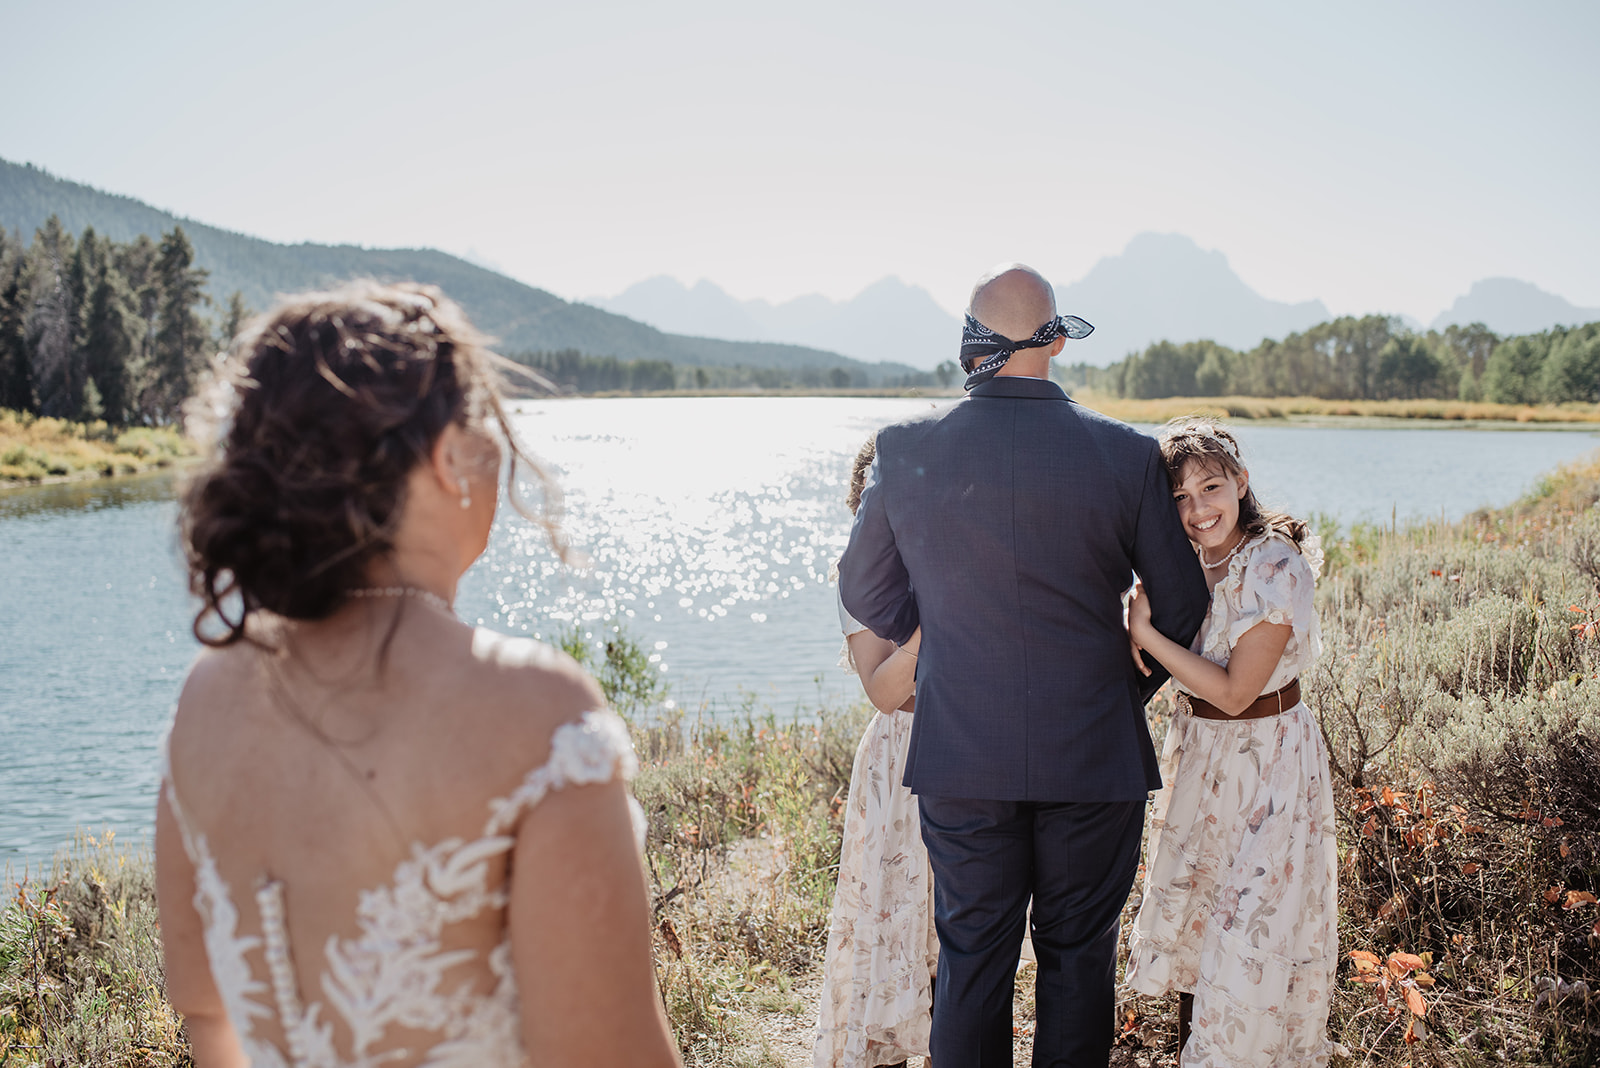 first look from the brides perspective with the groom facing away from the bride at Oxbow Bend in Jackson Hole as the bride walks up behind him for the first look